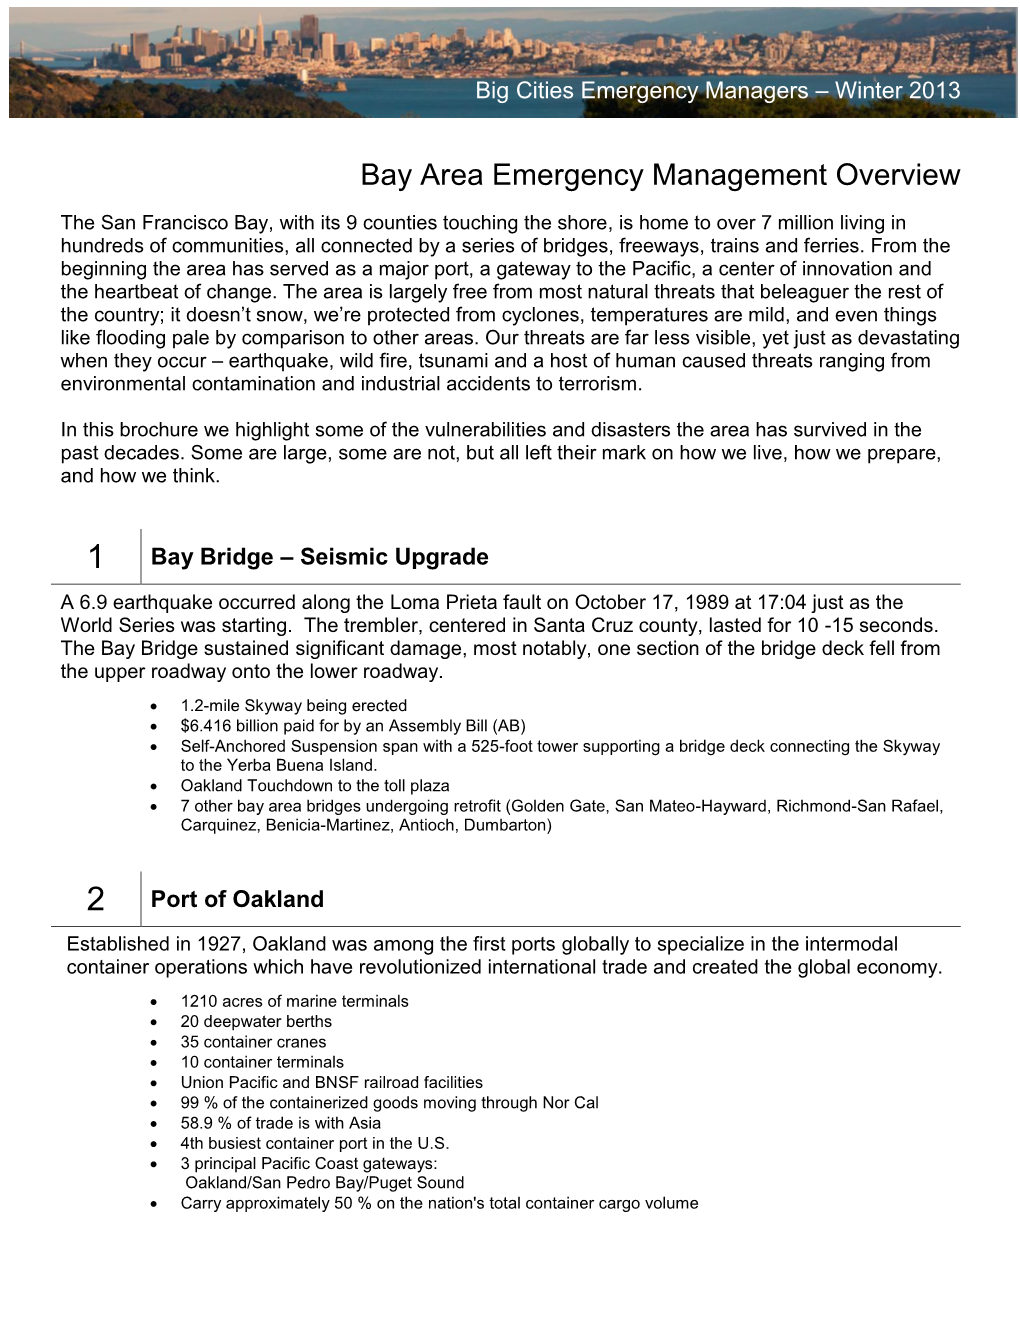 Bay Area Emergency Management Overview